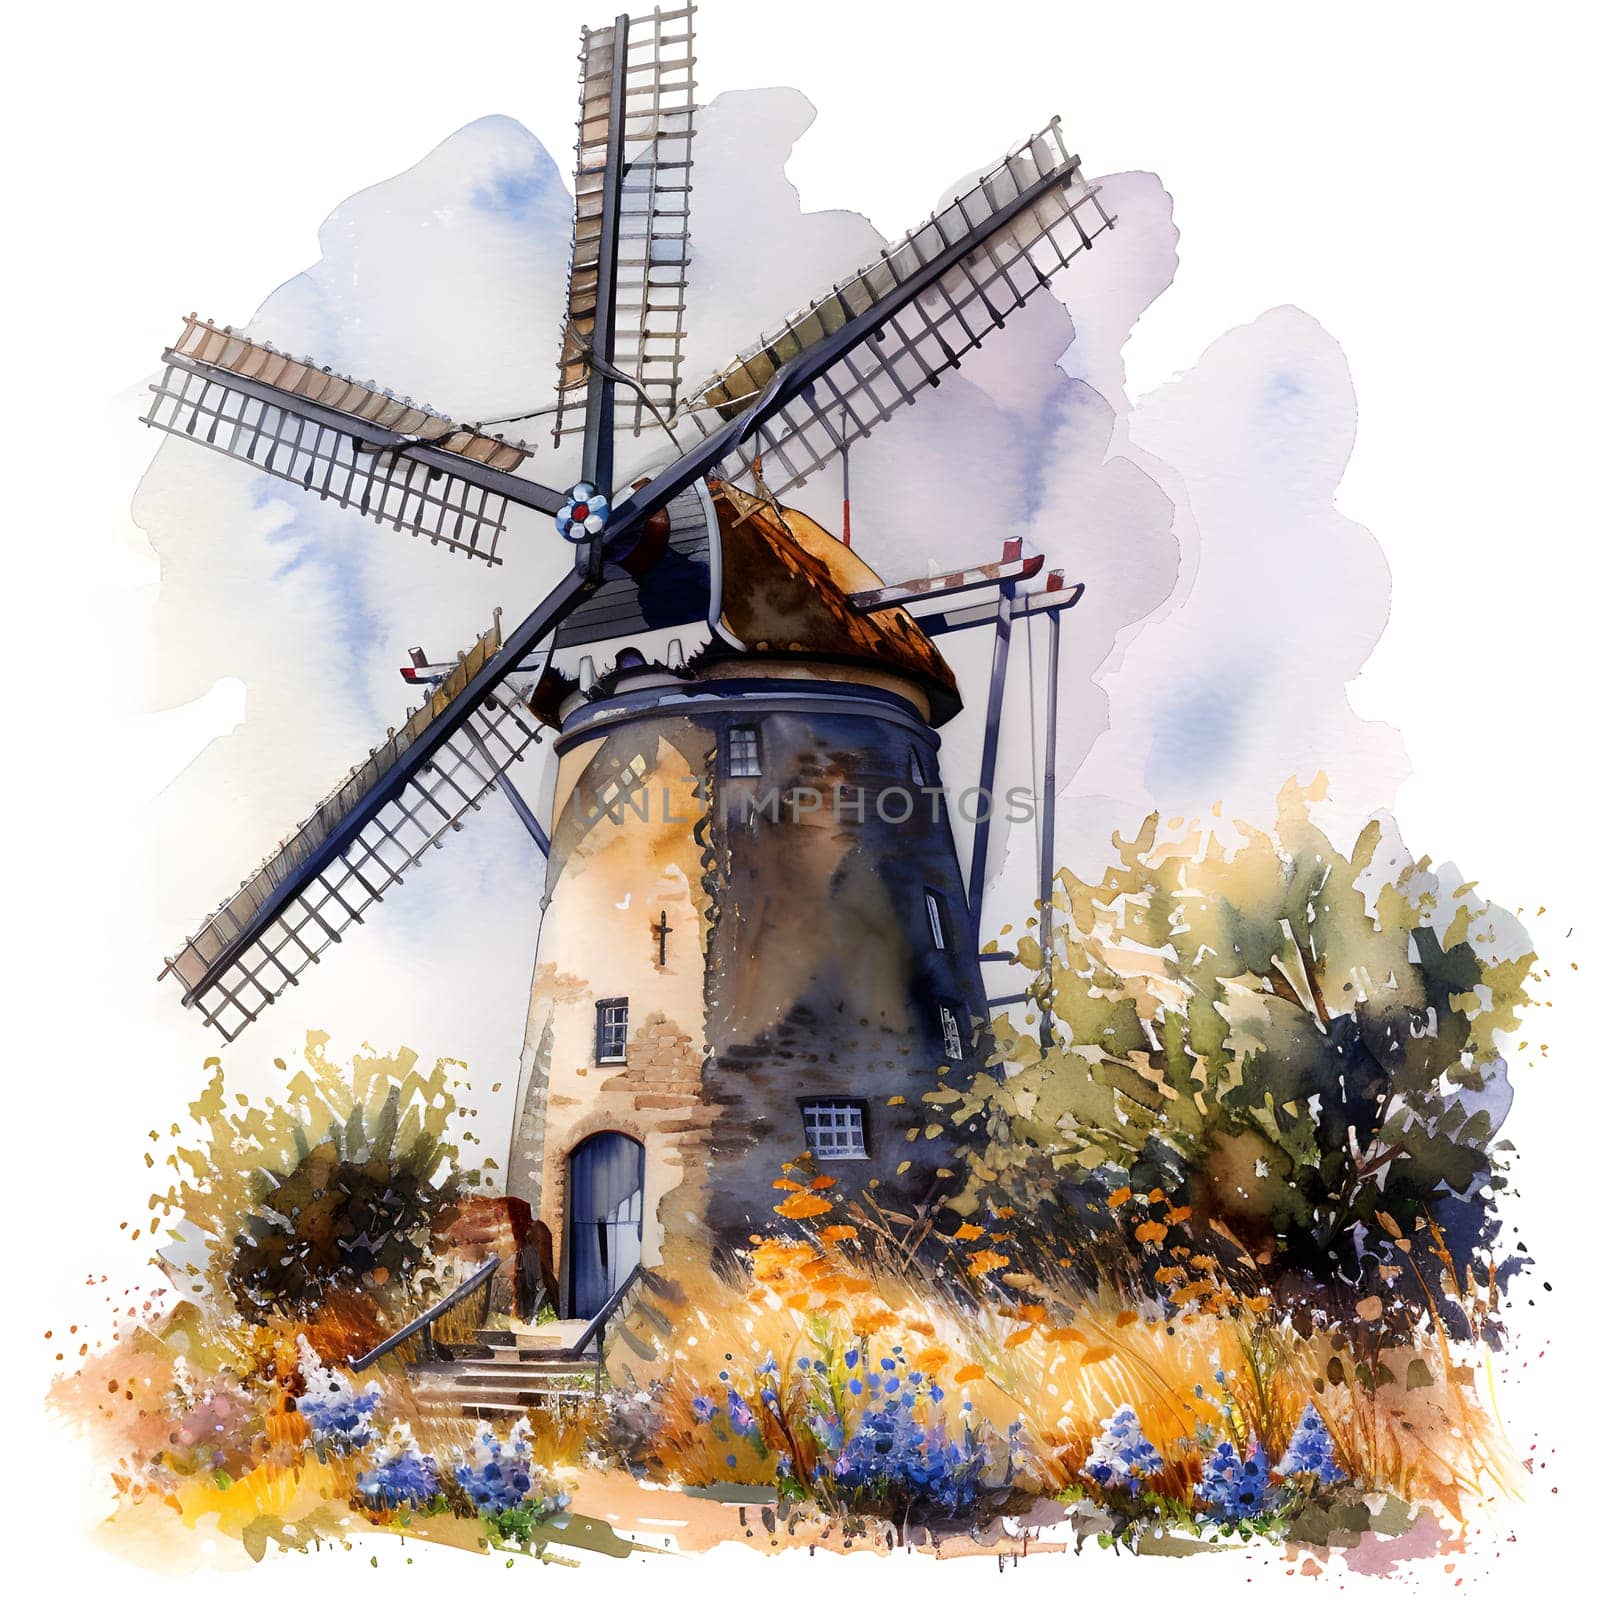 A watercolor painting of a picturesque windmill surrounded by lush green fields under a clear blue sky, capturing the beauty of nature and rural life